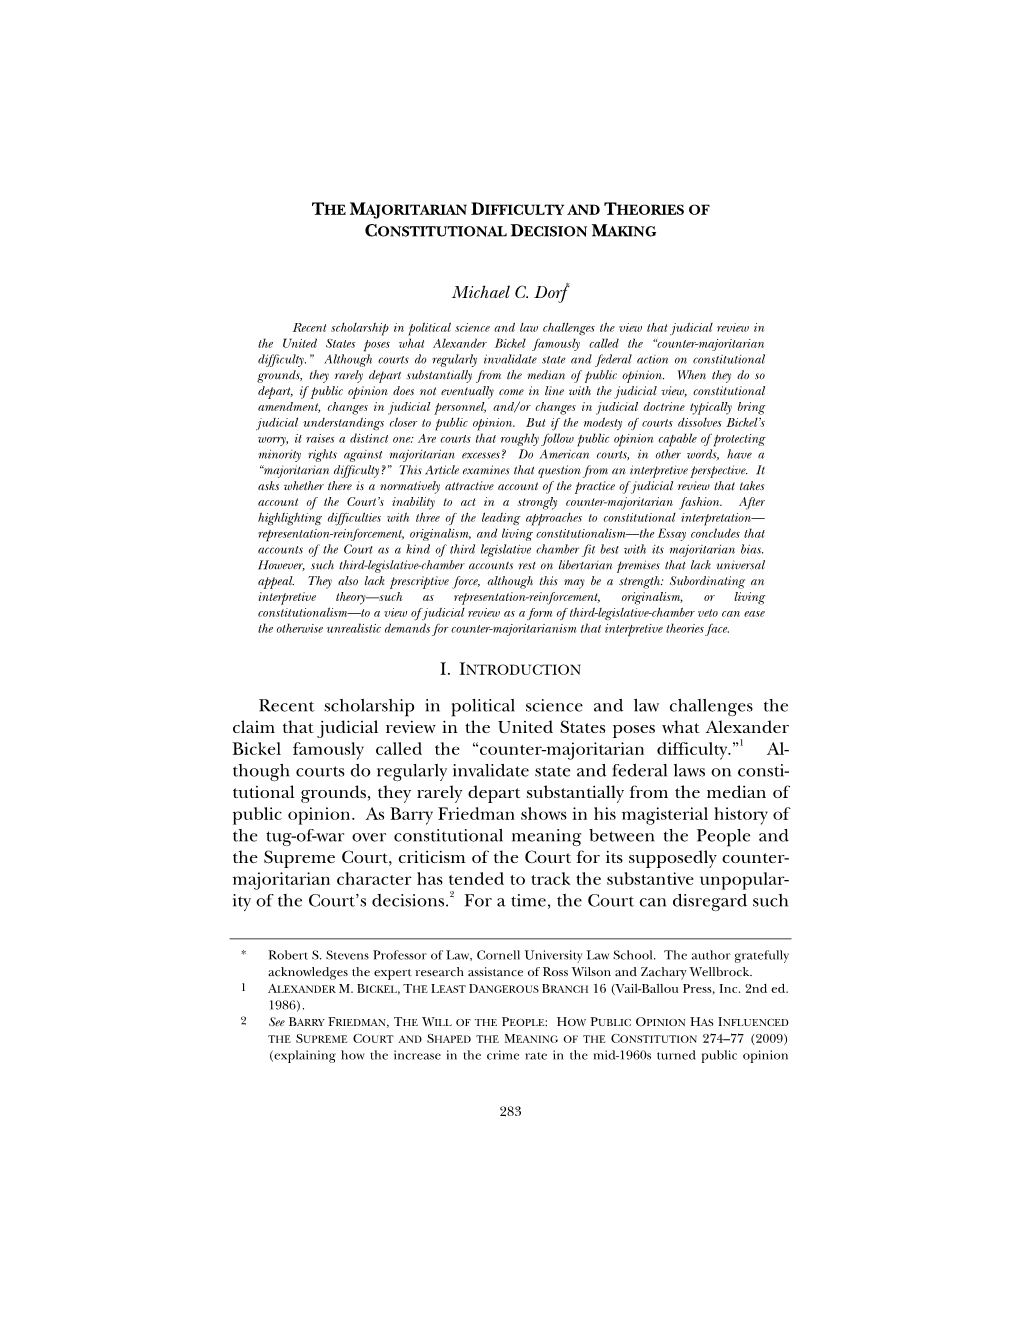 The Majoritarian Difficulty and Theories of Constitutional Decision Making